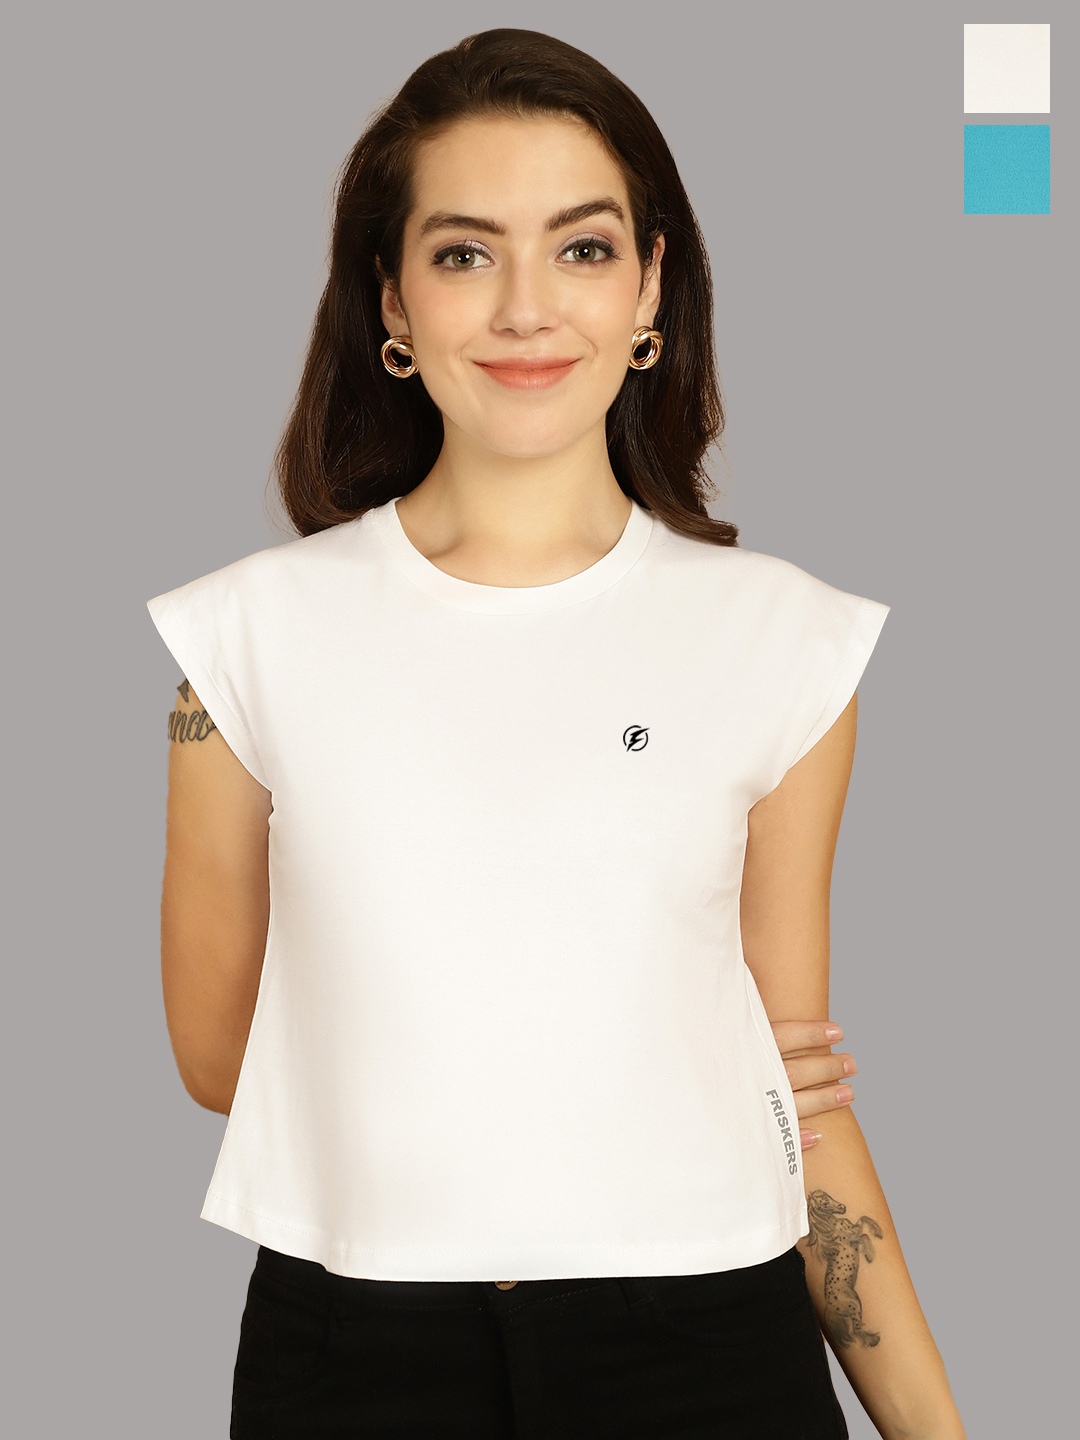 

Friskers Women White 2 Extended Sleeves Applique T-shirt